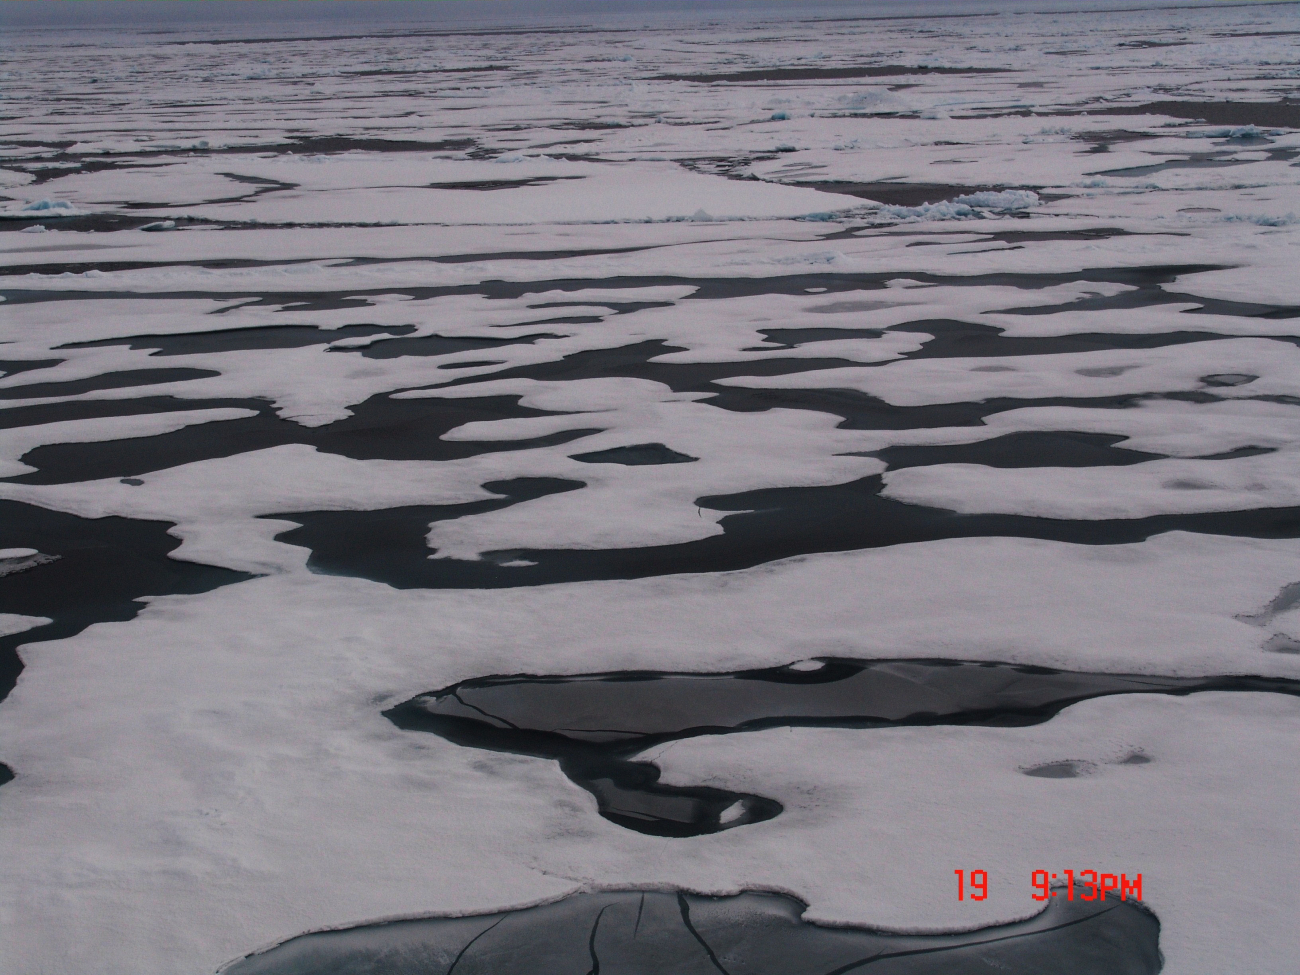 Melt ponds and ice floes